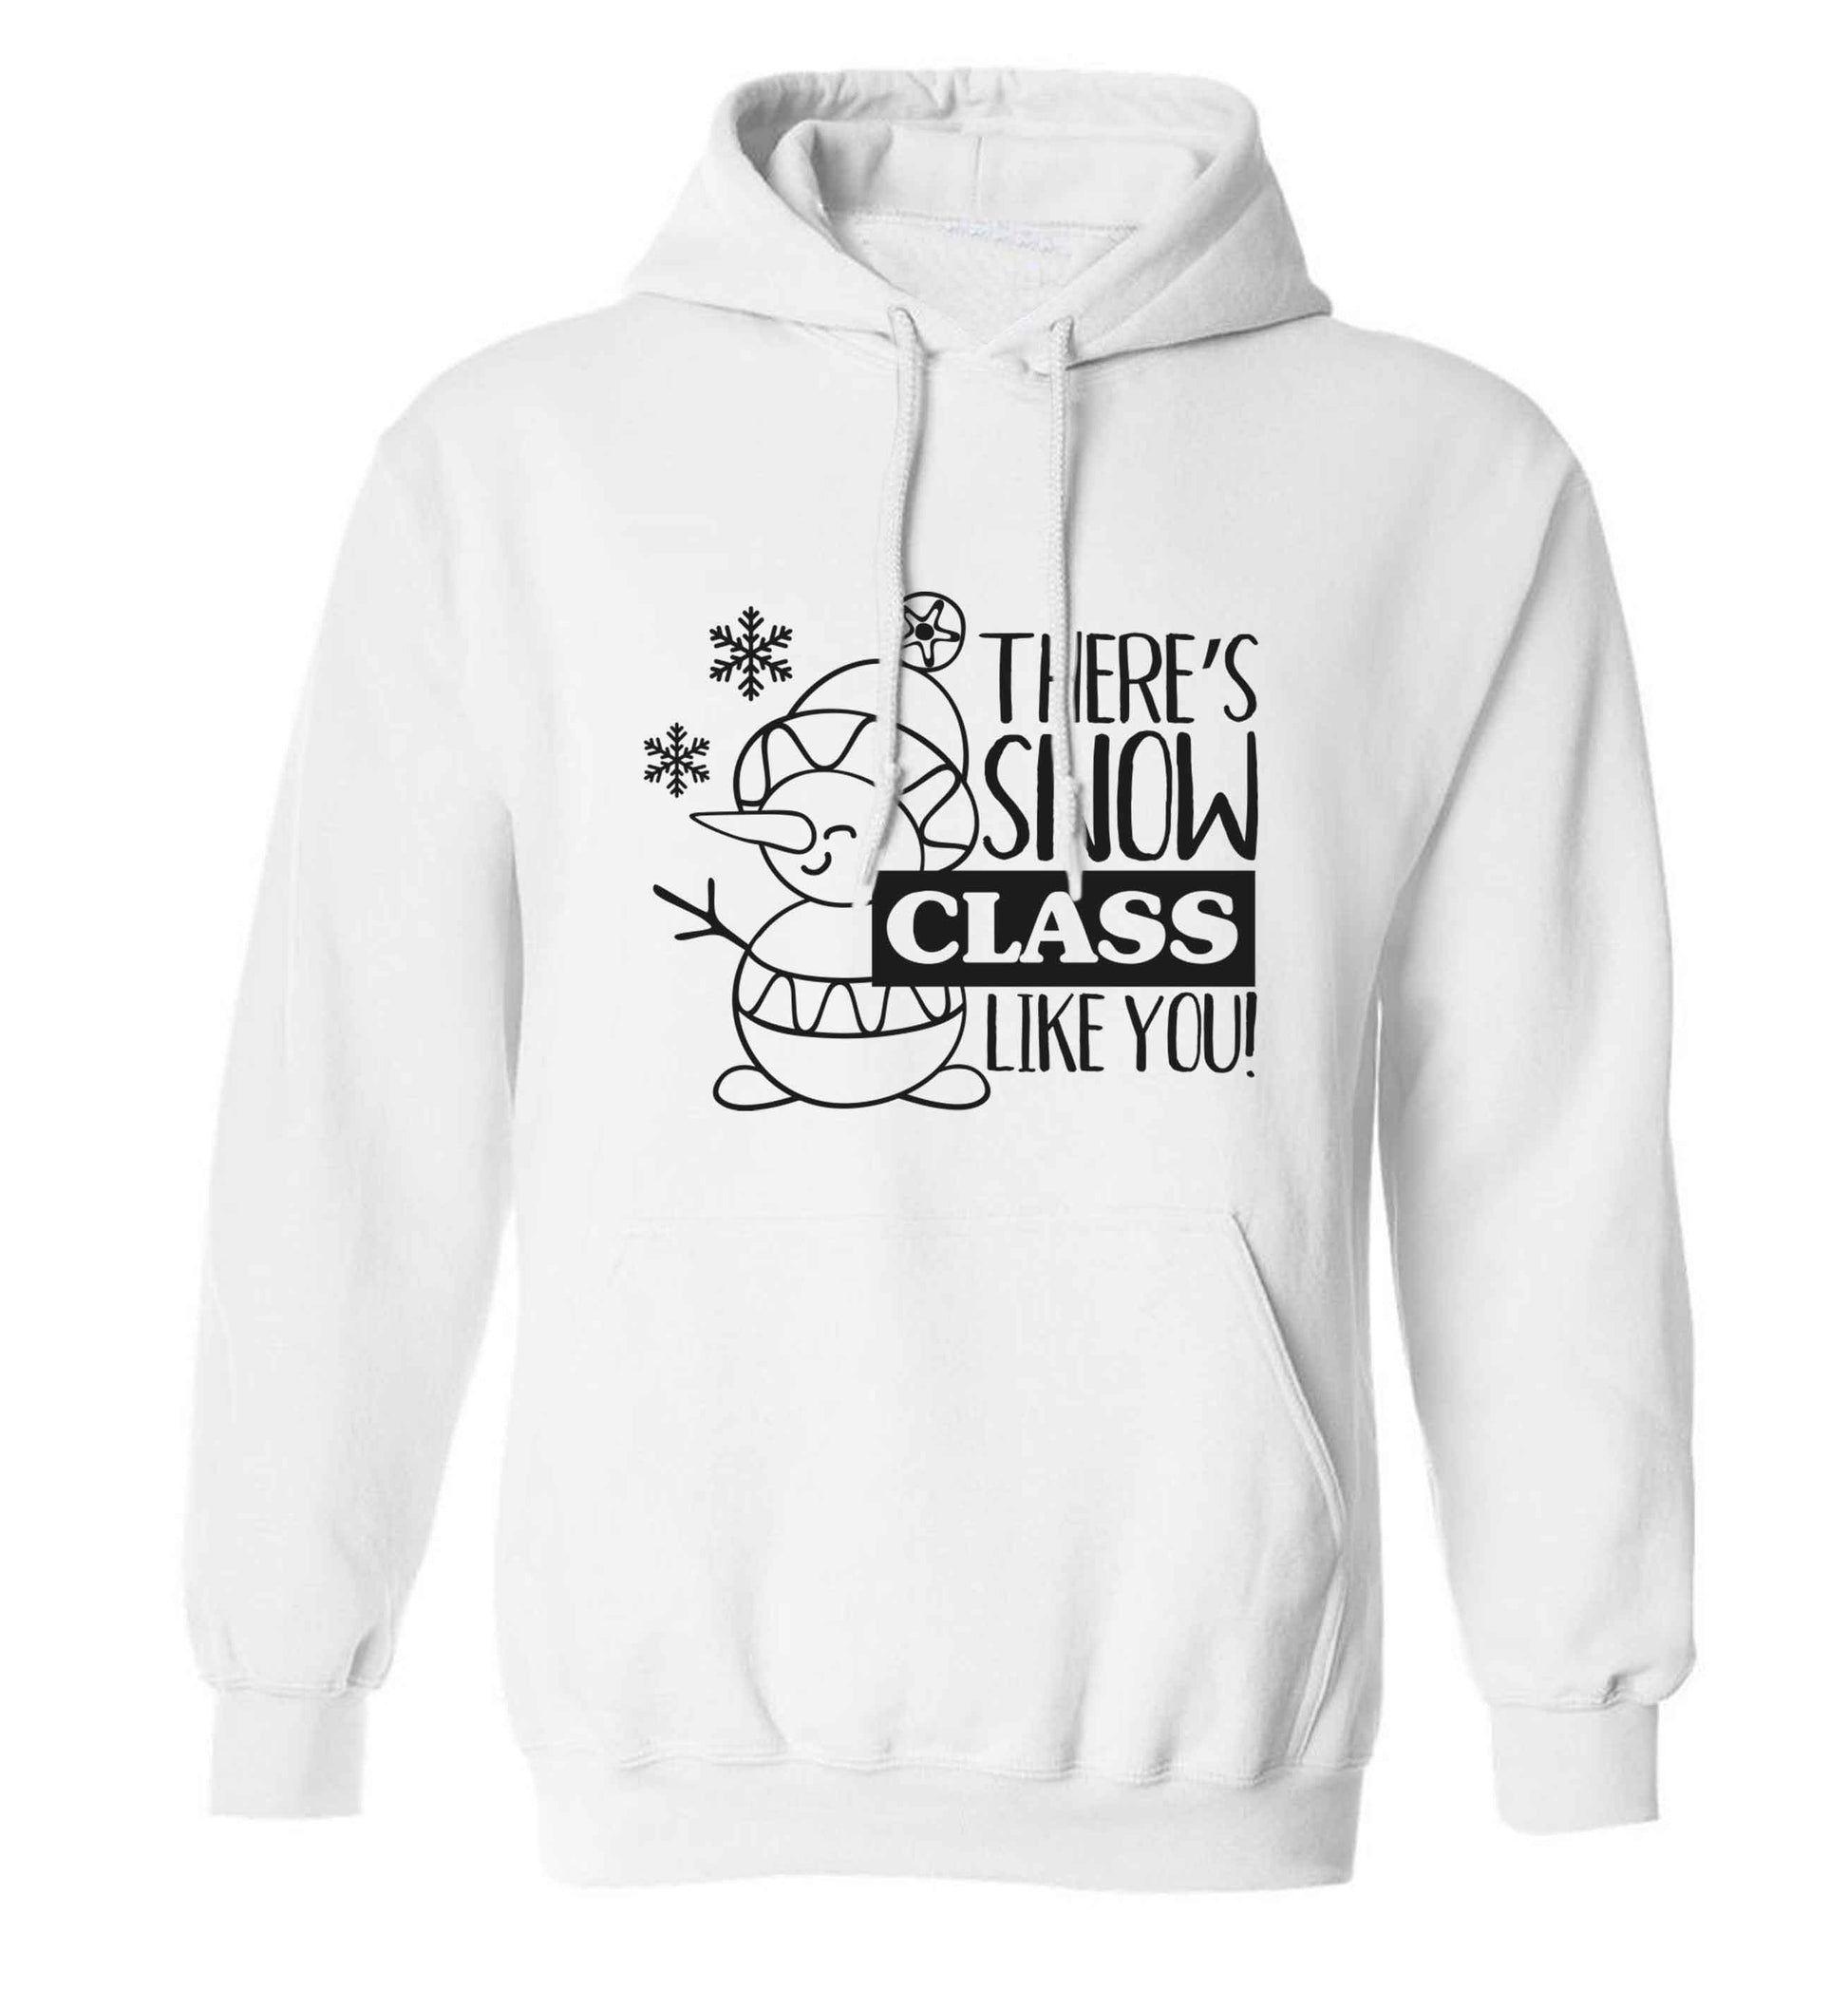 There's snow class like you adults unisex white hoodie 2XL